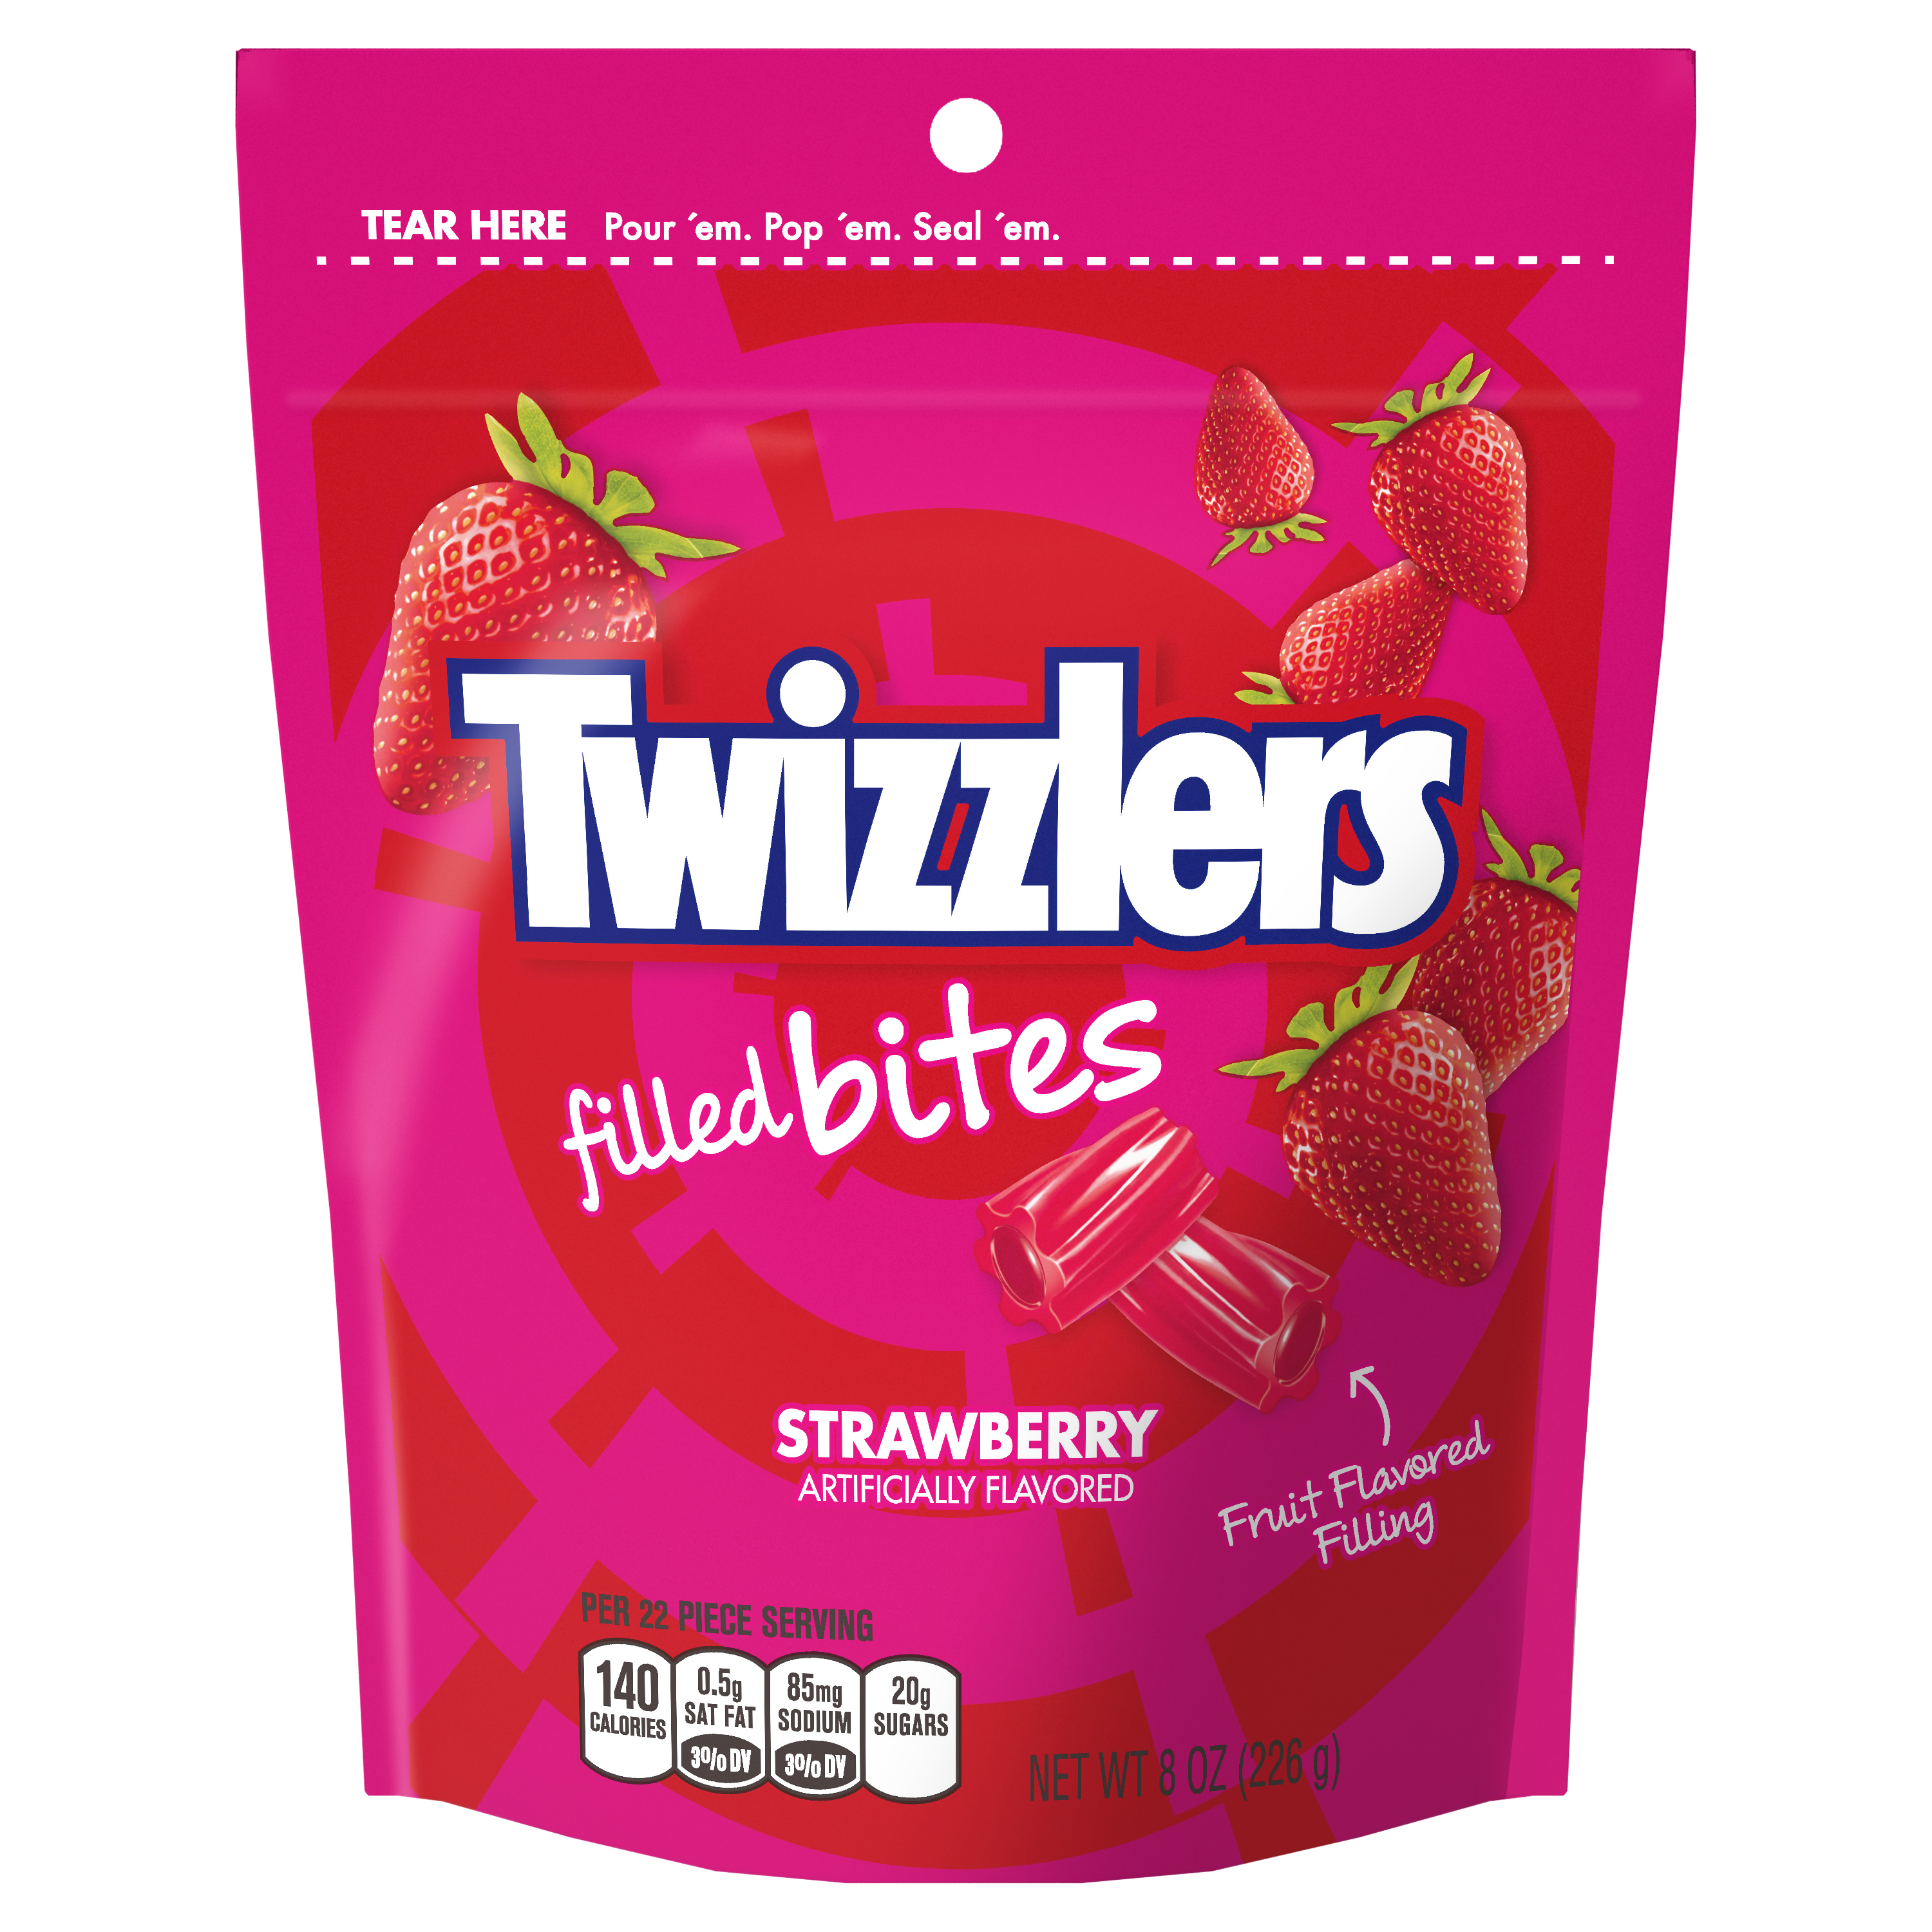 TWIZZLERS Filled Bites Strawberry Flavored Candy, 8 oz bag - Front of Package